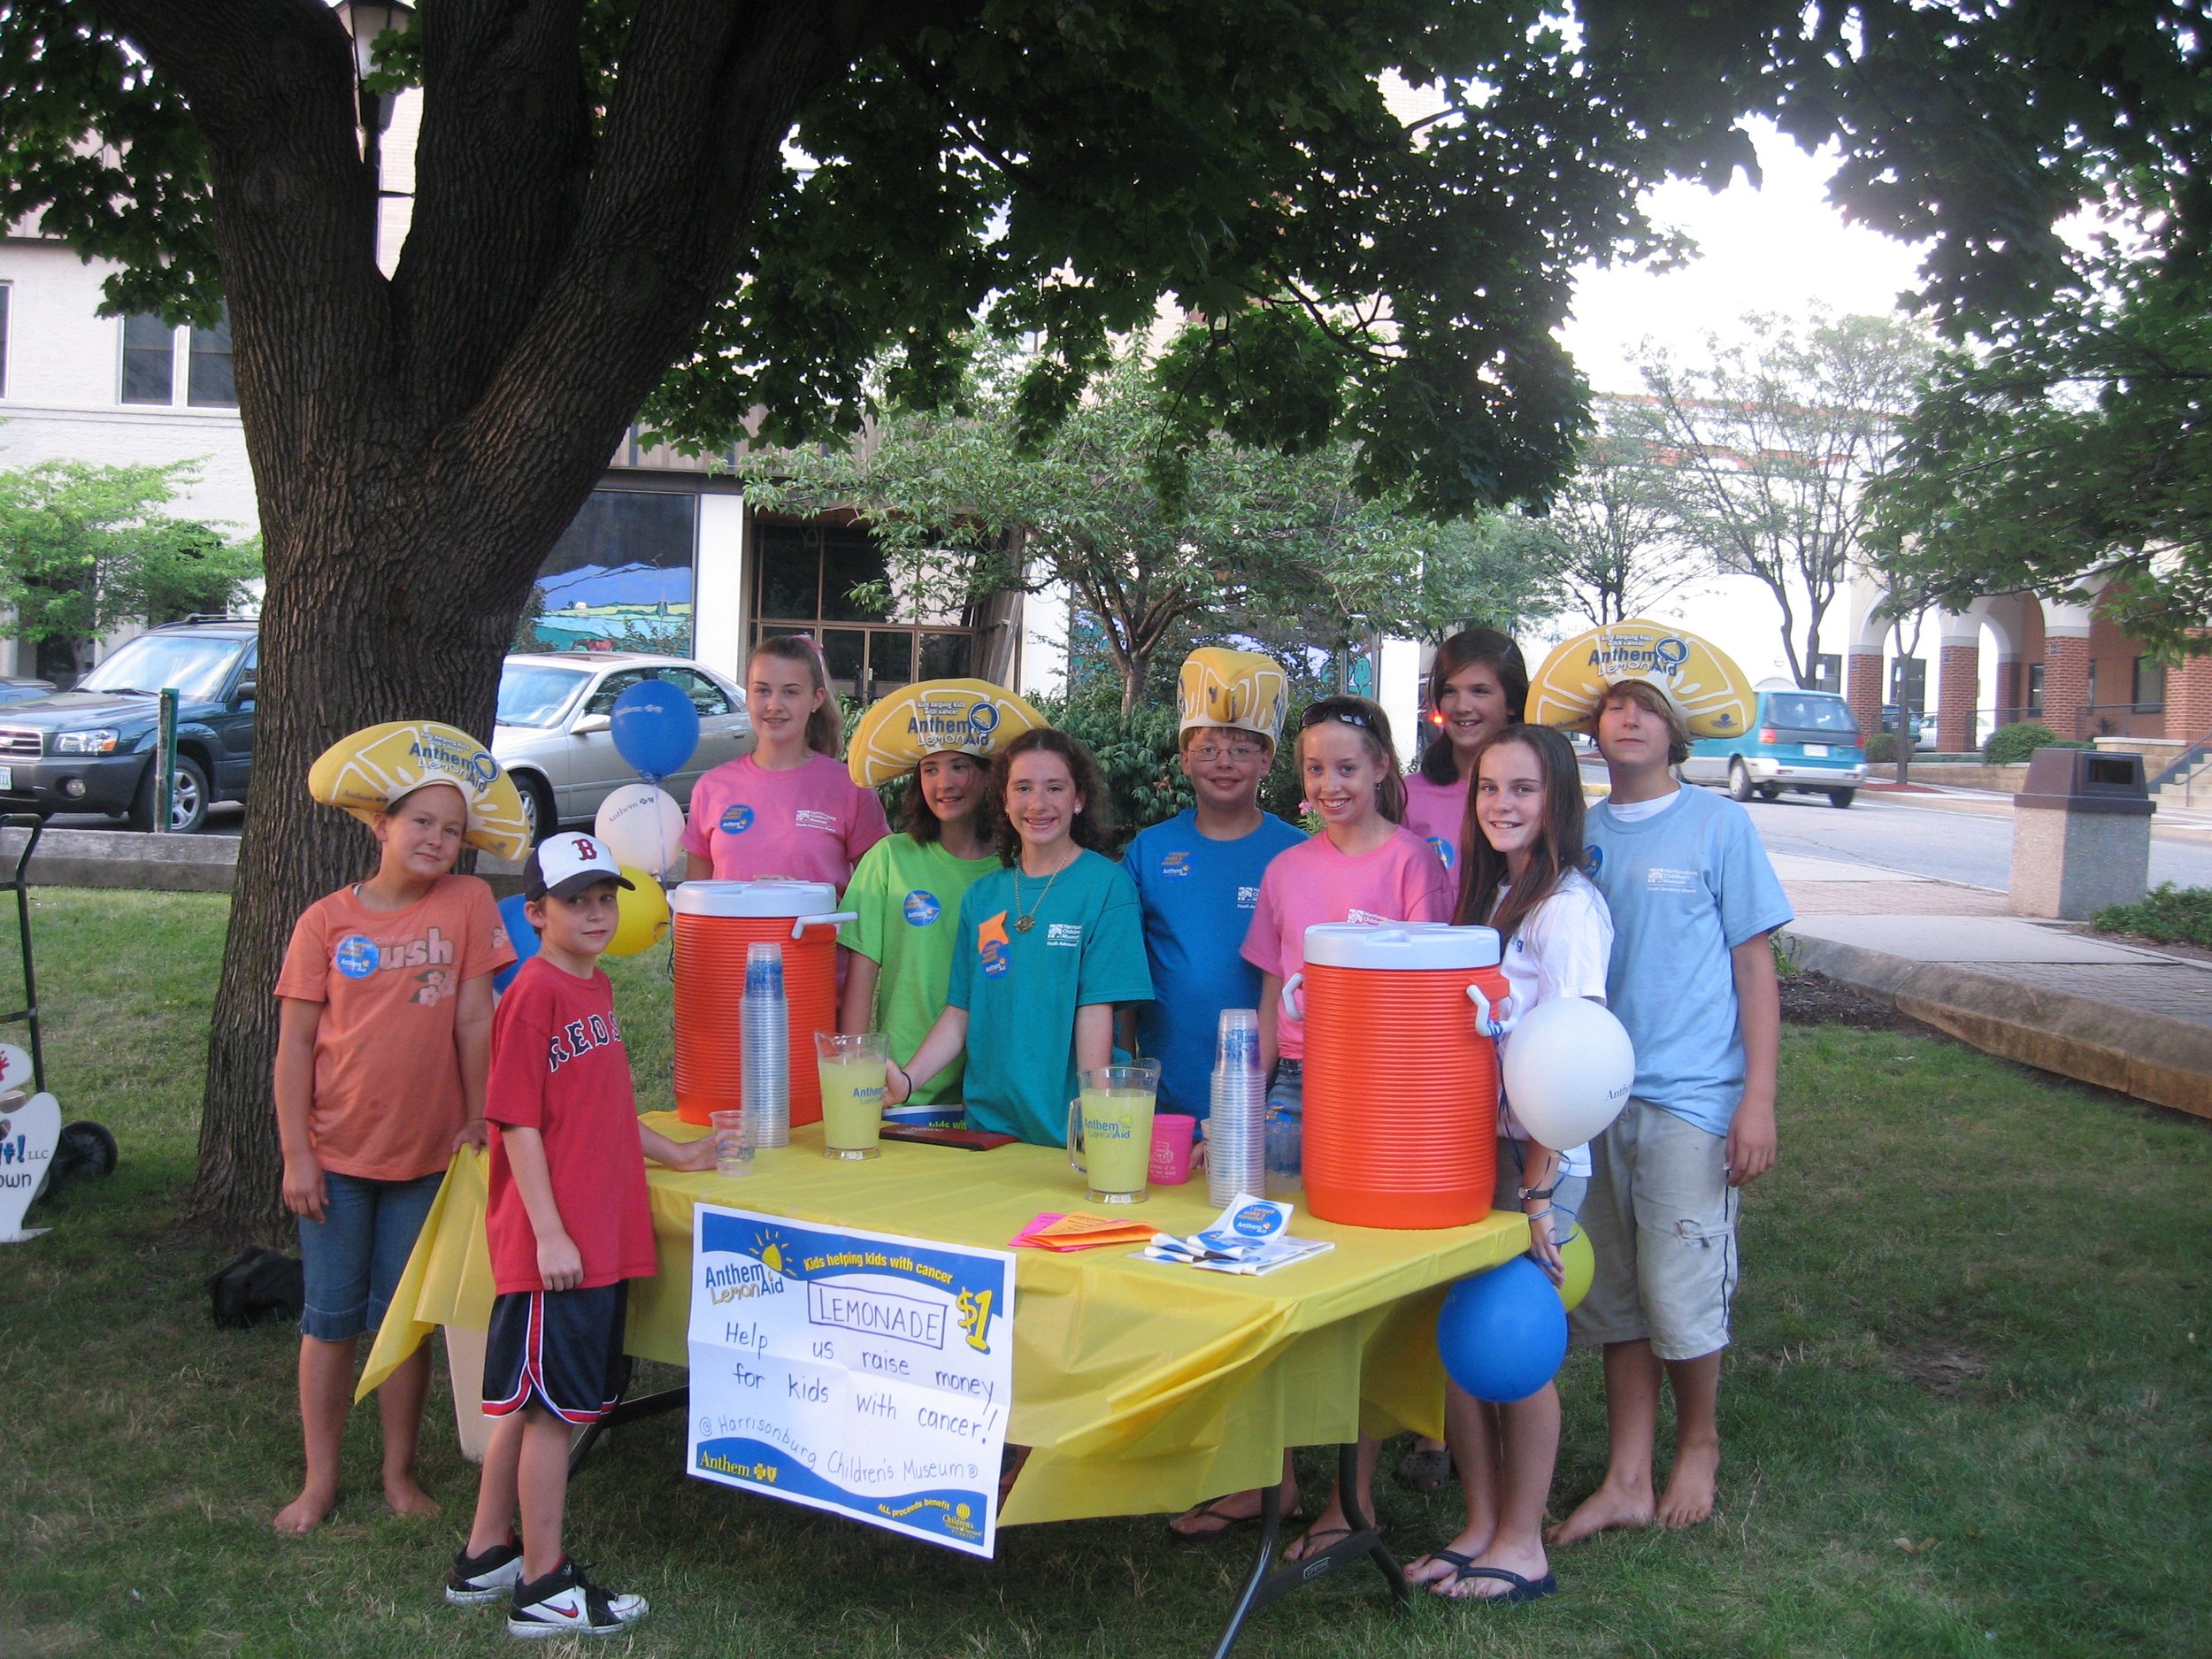  The Youth Advisory Board was very active. They loved selling lemonade at the local Friday night music events to benefit pediatric cancer patients.  